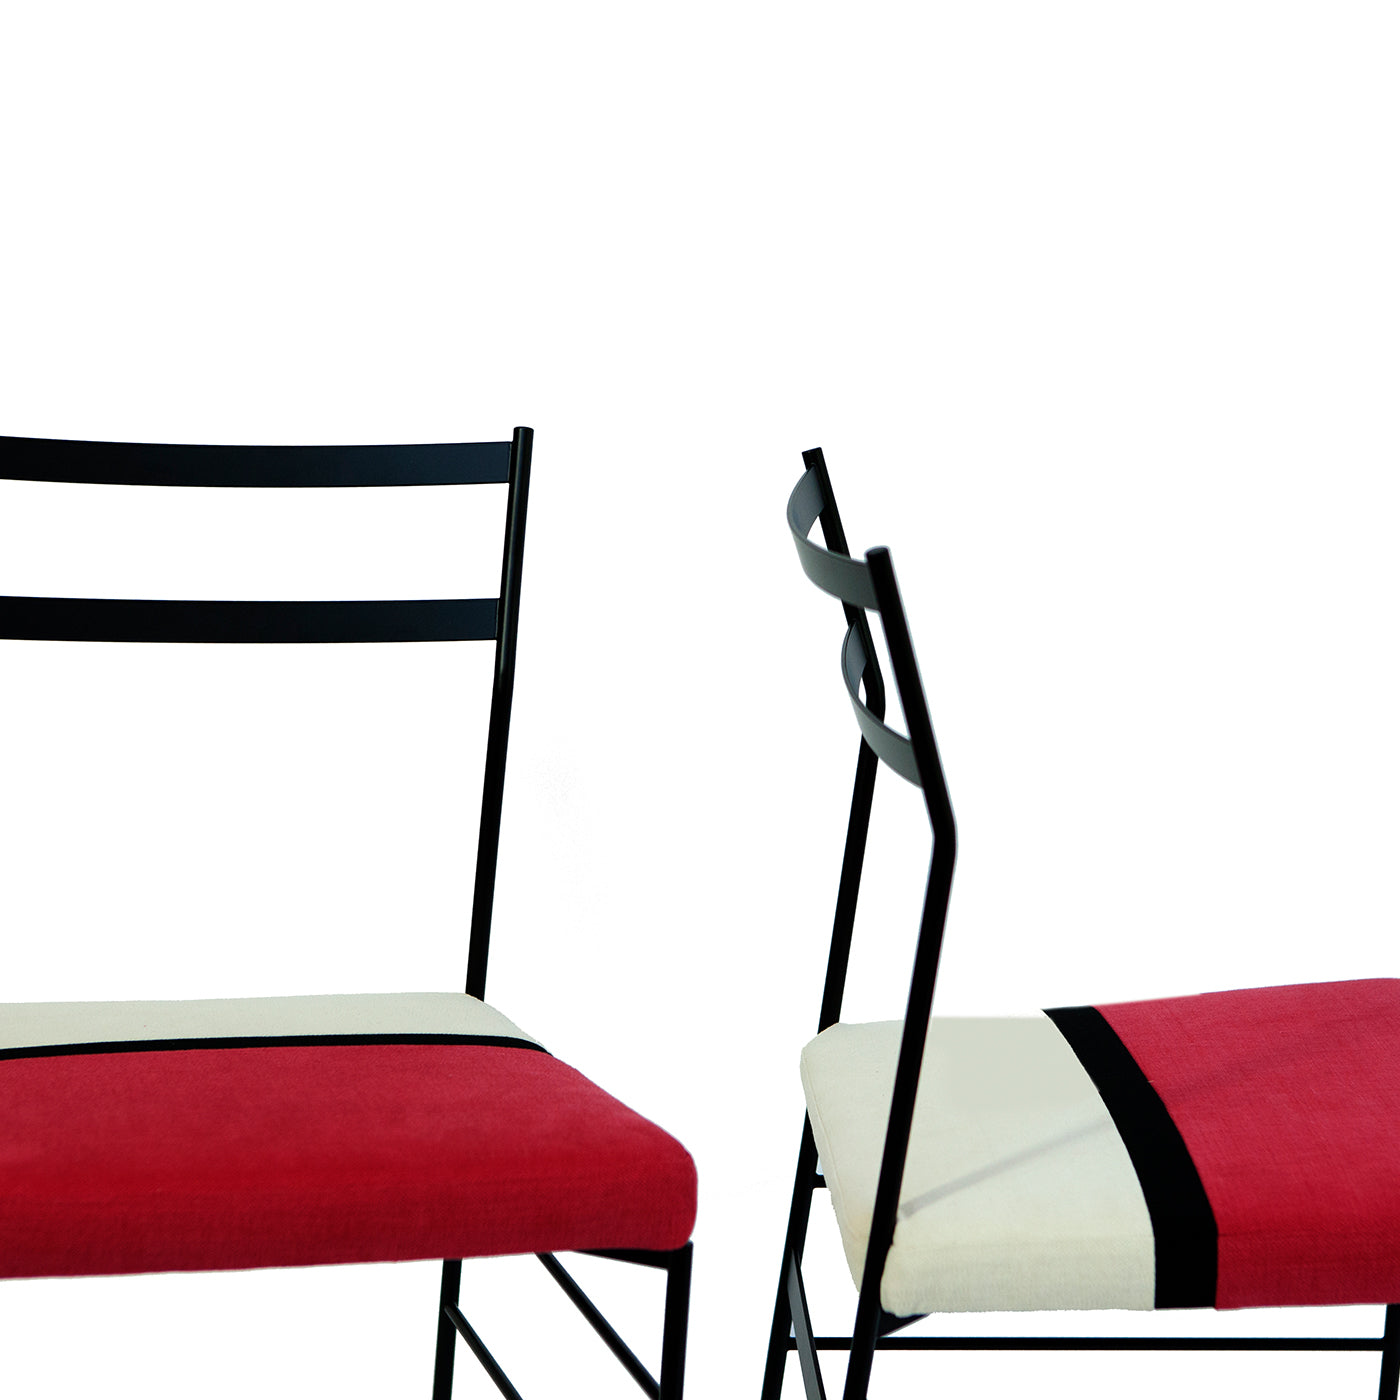 Set of 2 Pontina Bruxel Red and White Chair - Alternative view 3